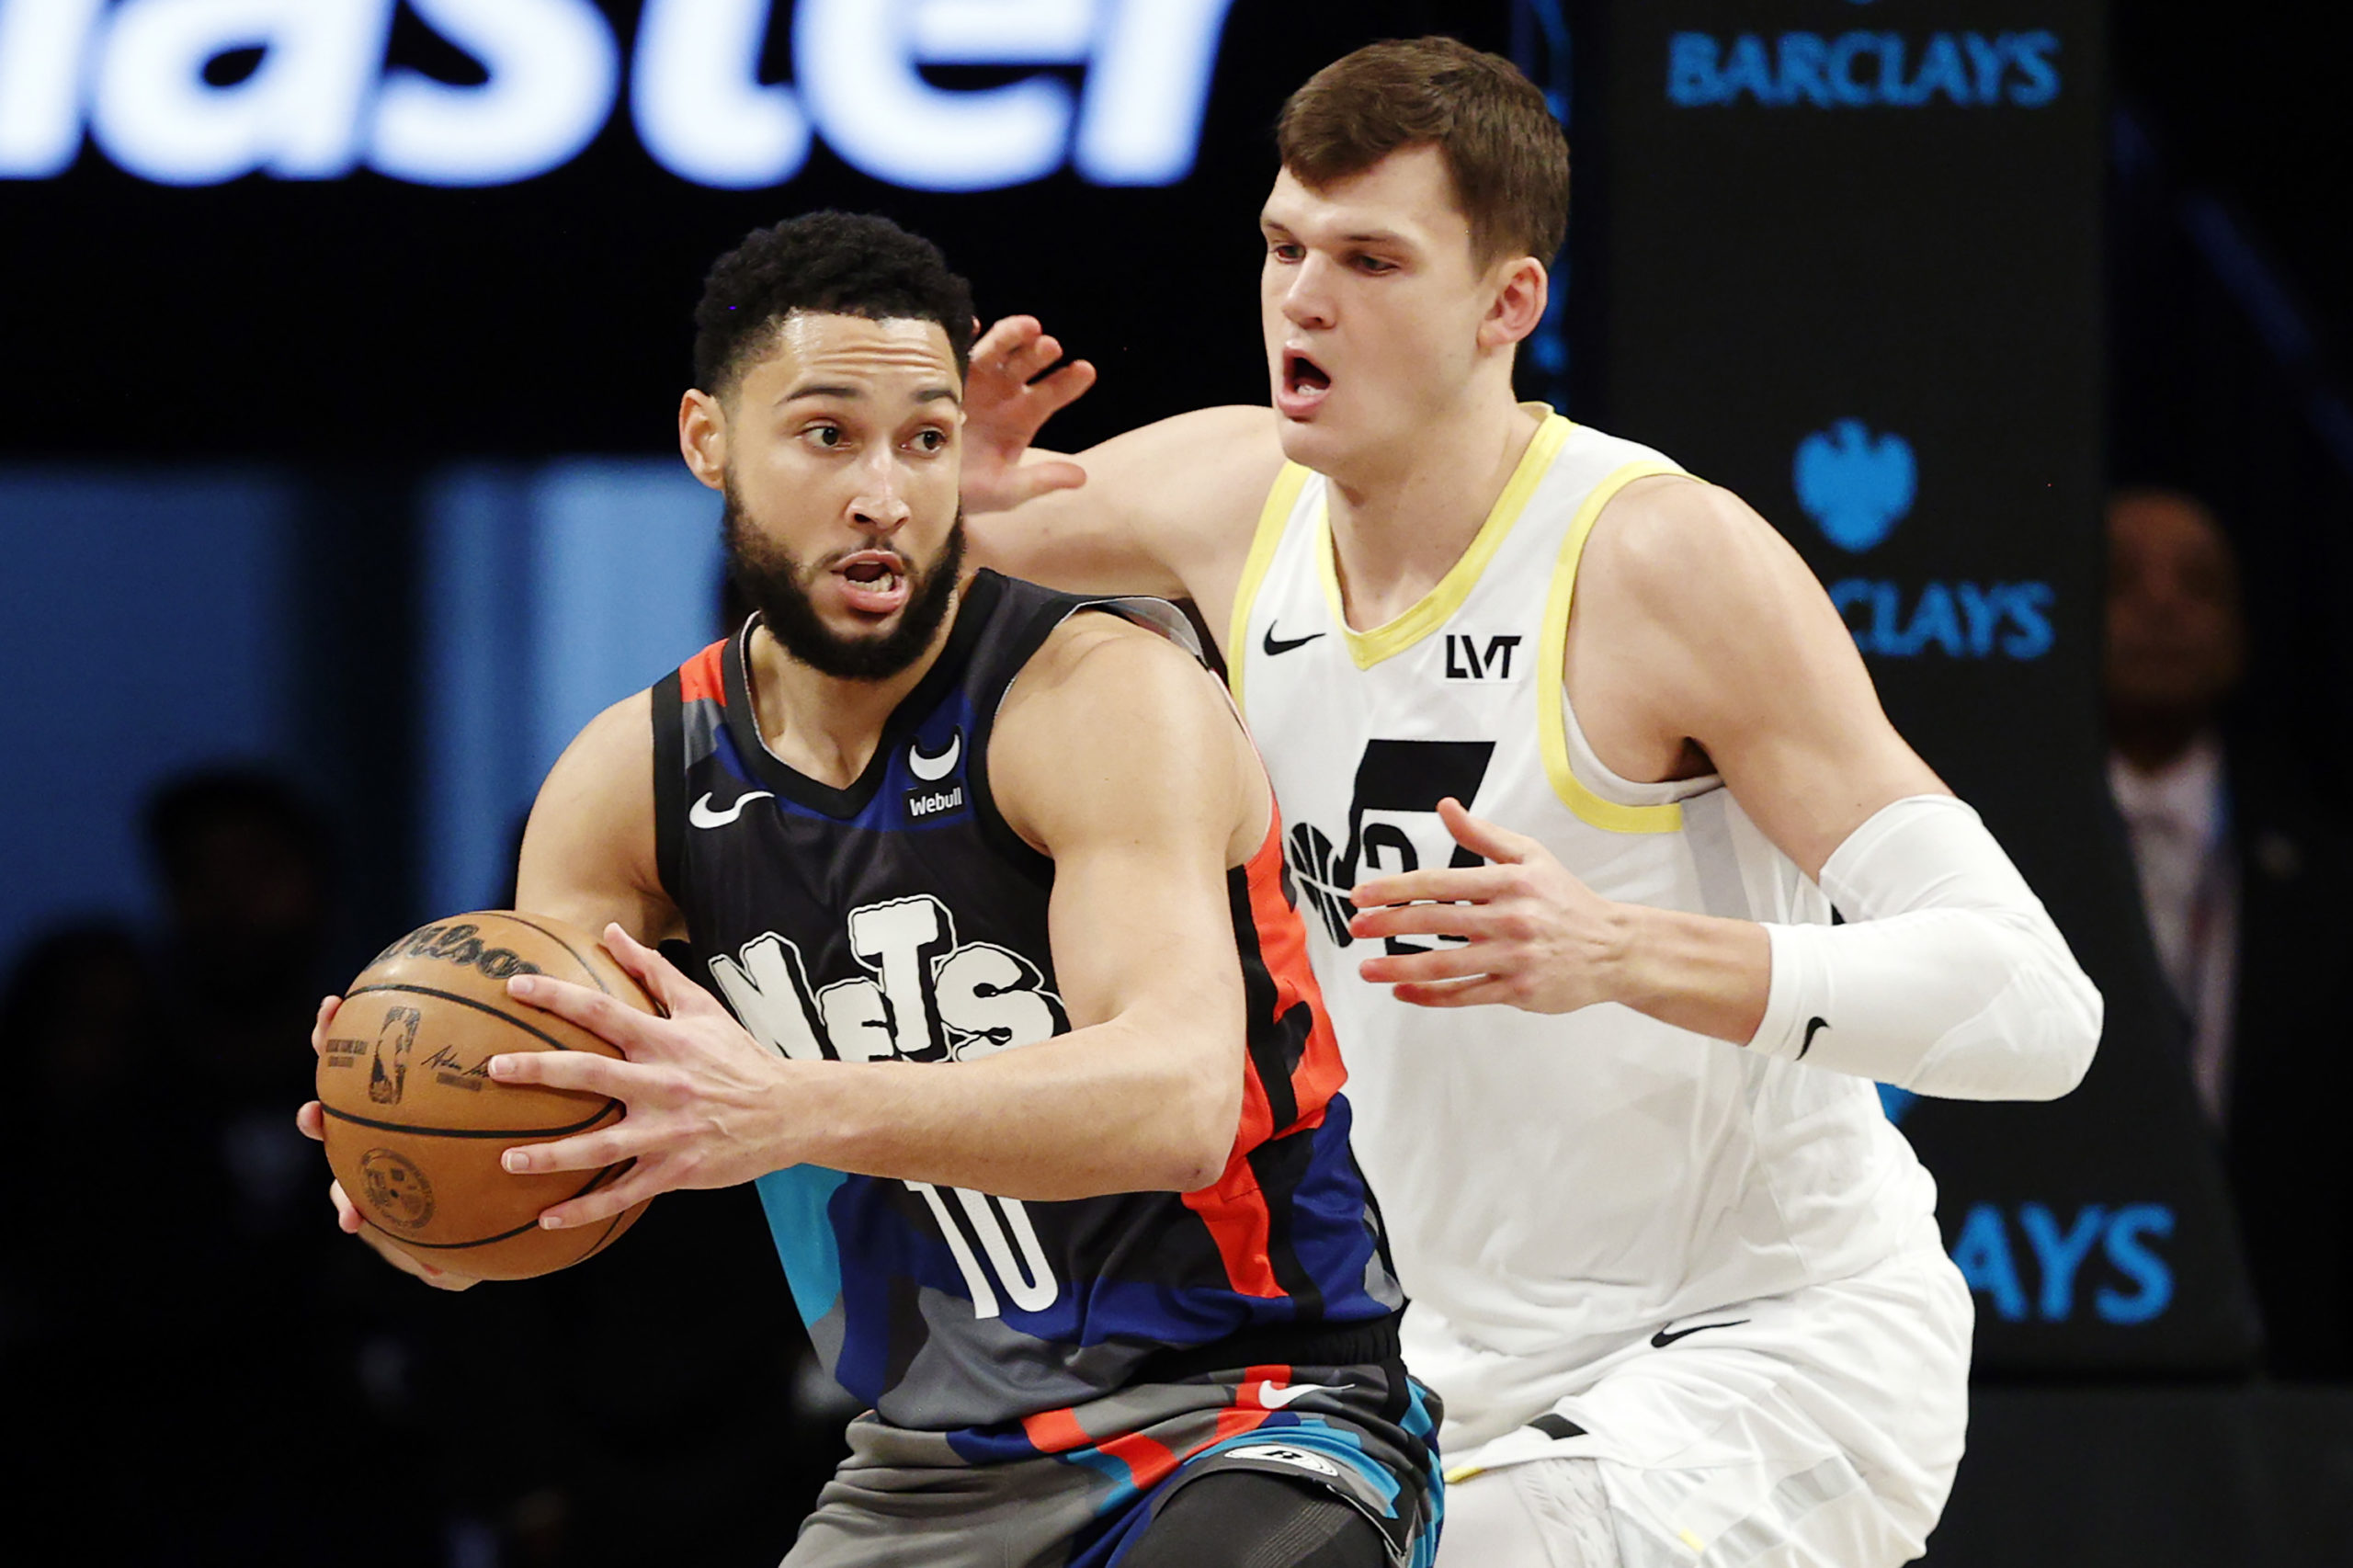 NEW YORK, NEW YORK - JANUARY 29: Ben Simmons #10 of the Brooklyn Nets dribbles against Walker Kessler #24 of the Utah Jazz during the first half at Barclays Center on January 29, 2024 in the Brooklyn borough of New York City. Sarah Stier/Getty Images